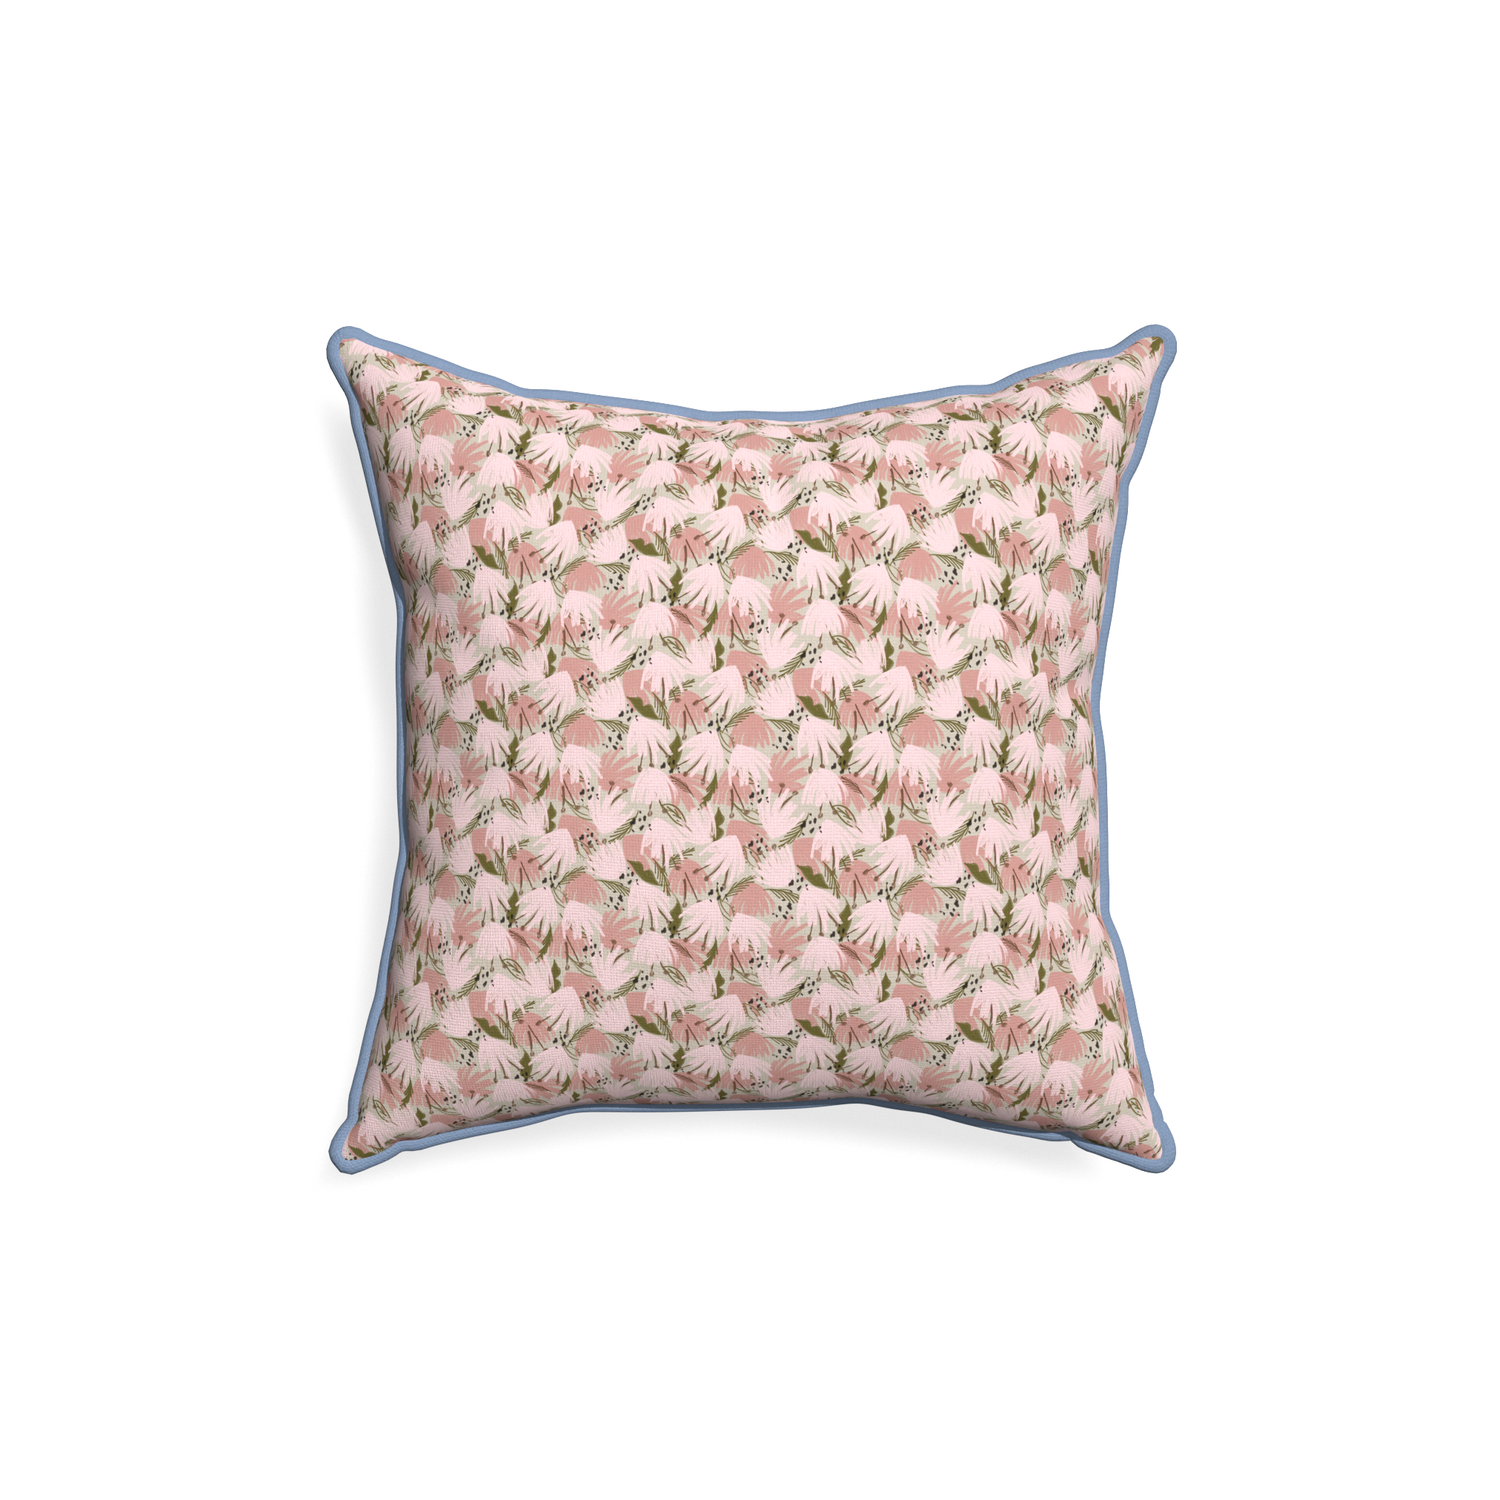 18-square eden pink custom pillow with sky piping on white background